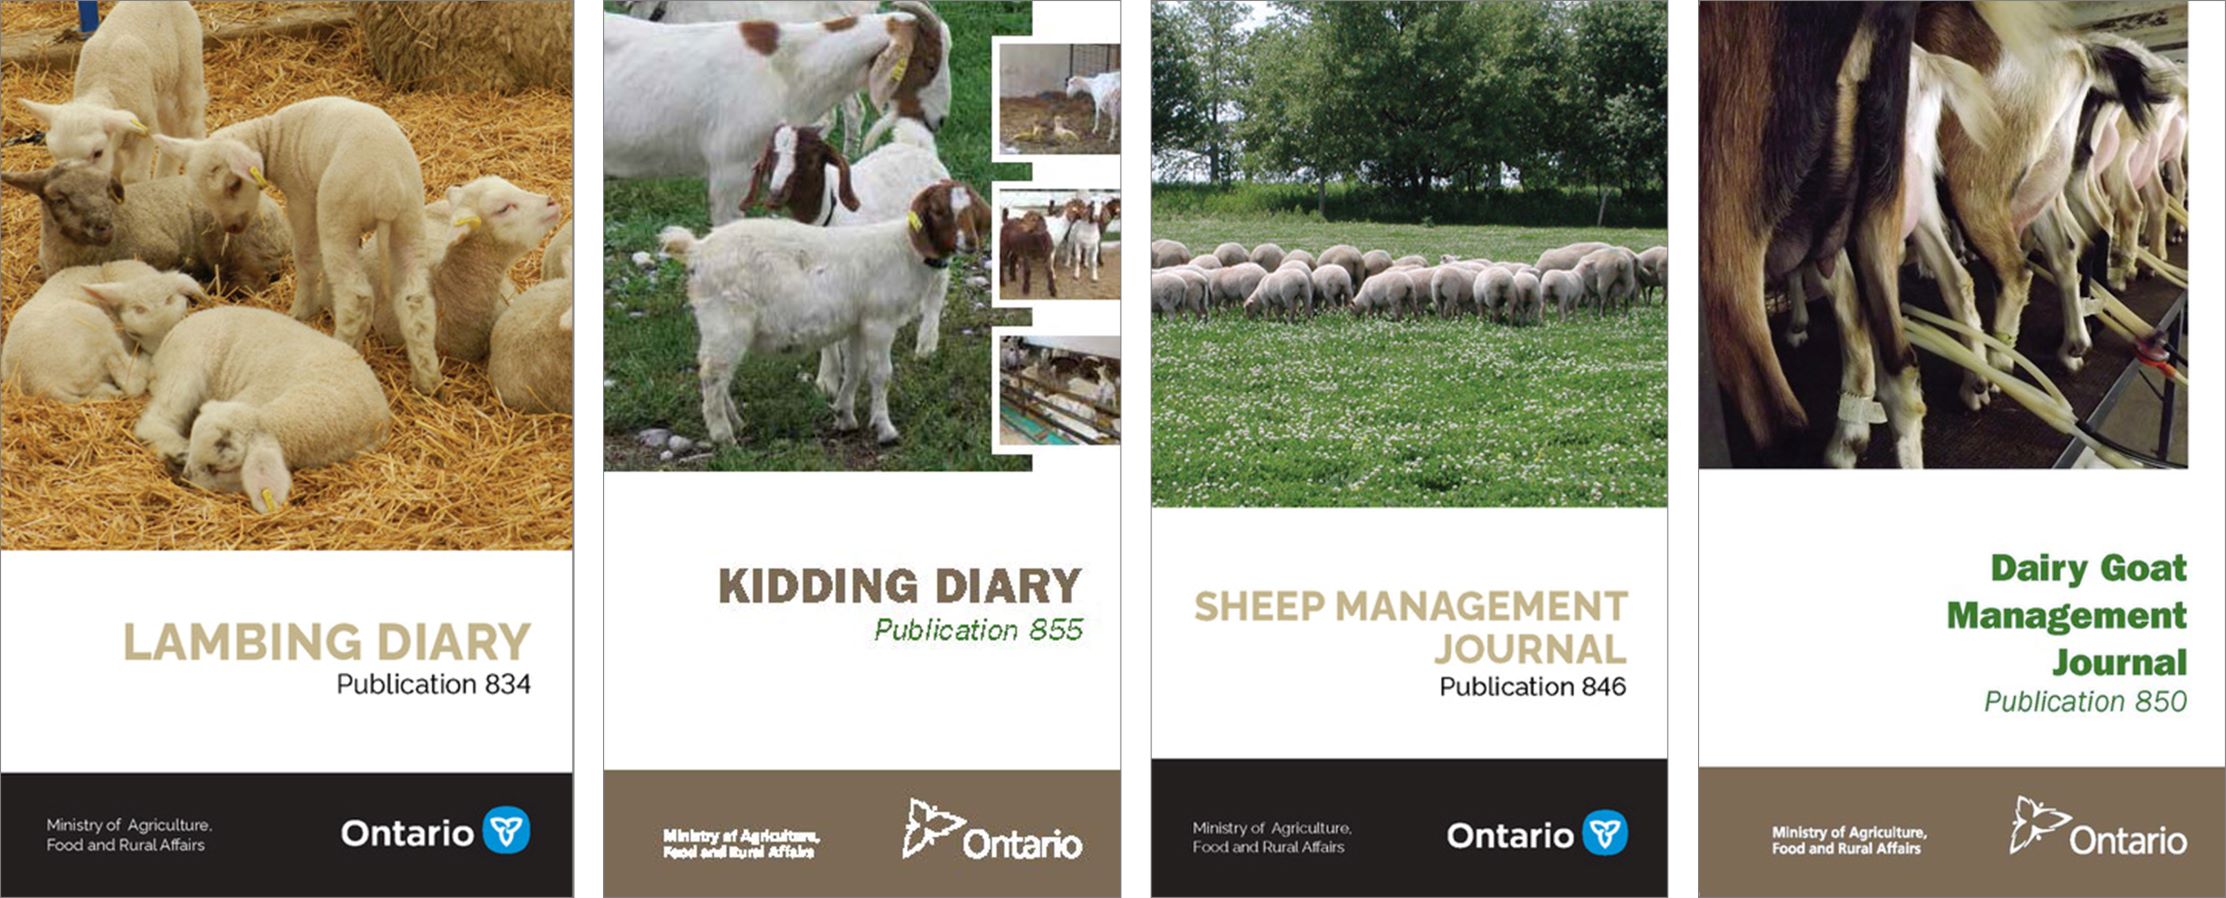 Covers of the Lambing Diary, Kidding Diary, Sheep Management Journal and Dairy Goat Management Journal.